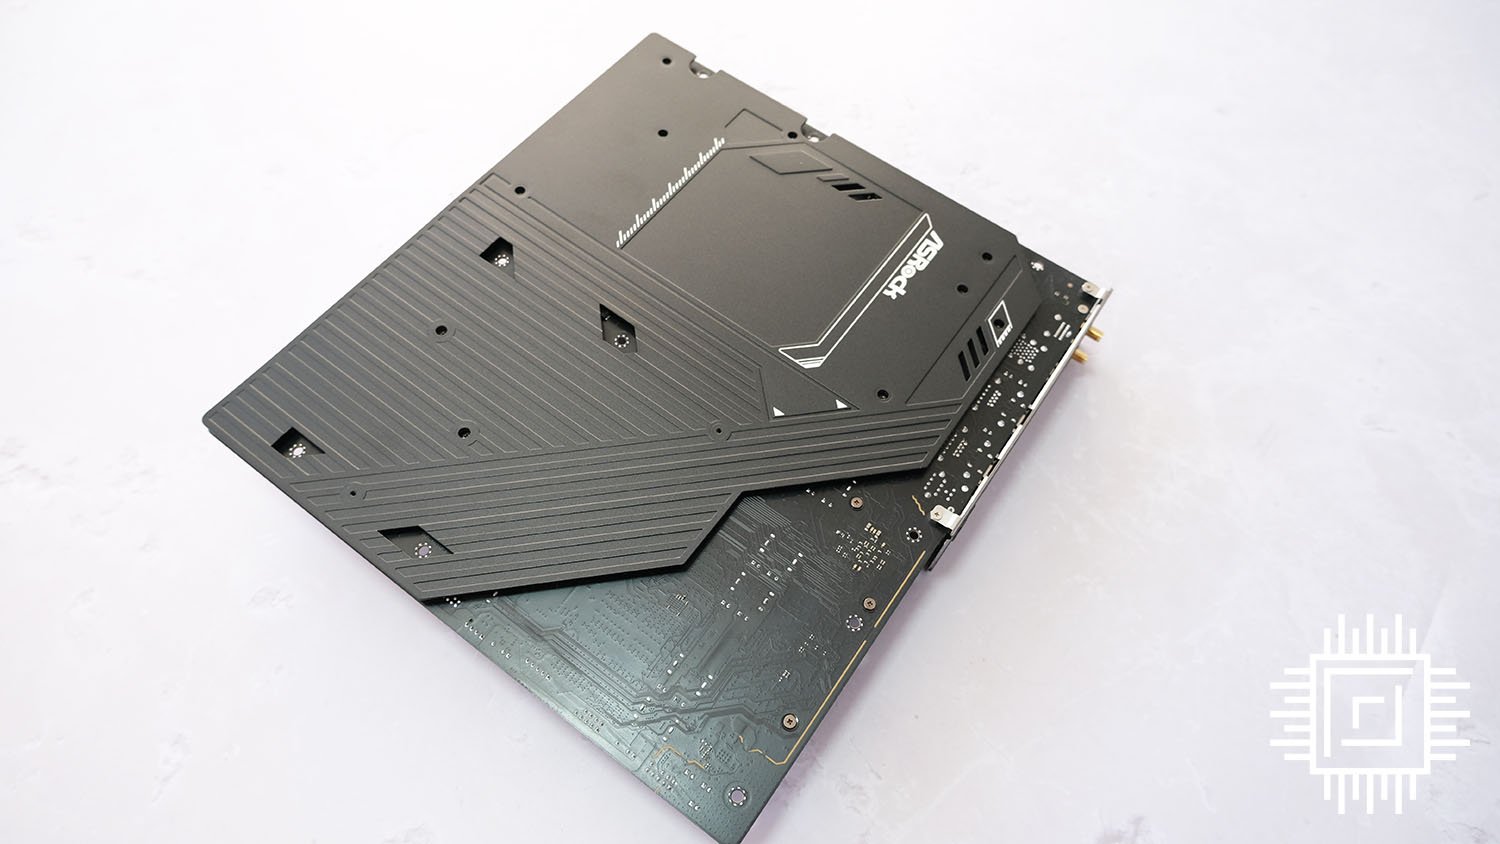 ASRock TRX50 WS has a large rear holding brace for increased rigidity.